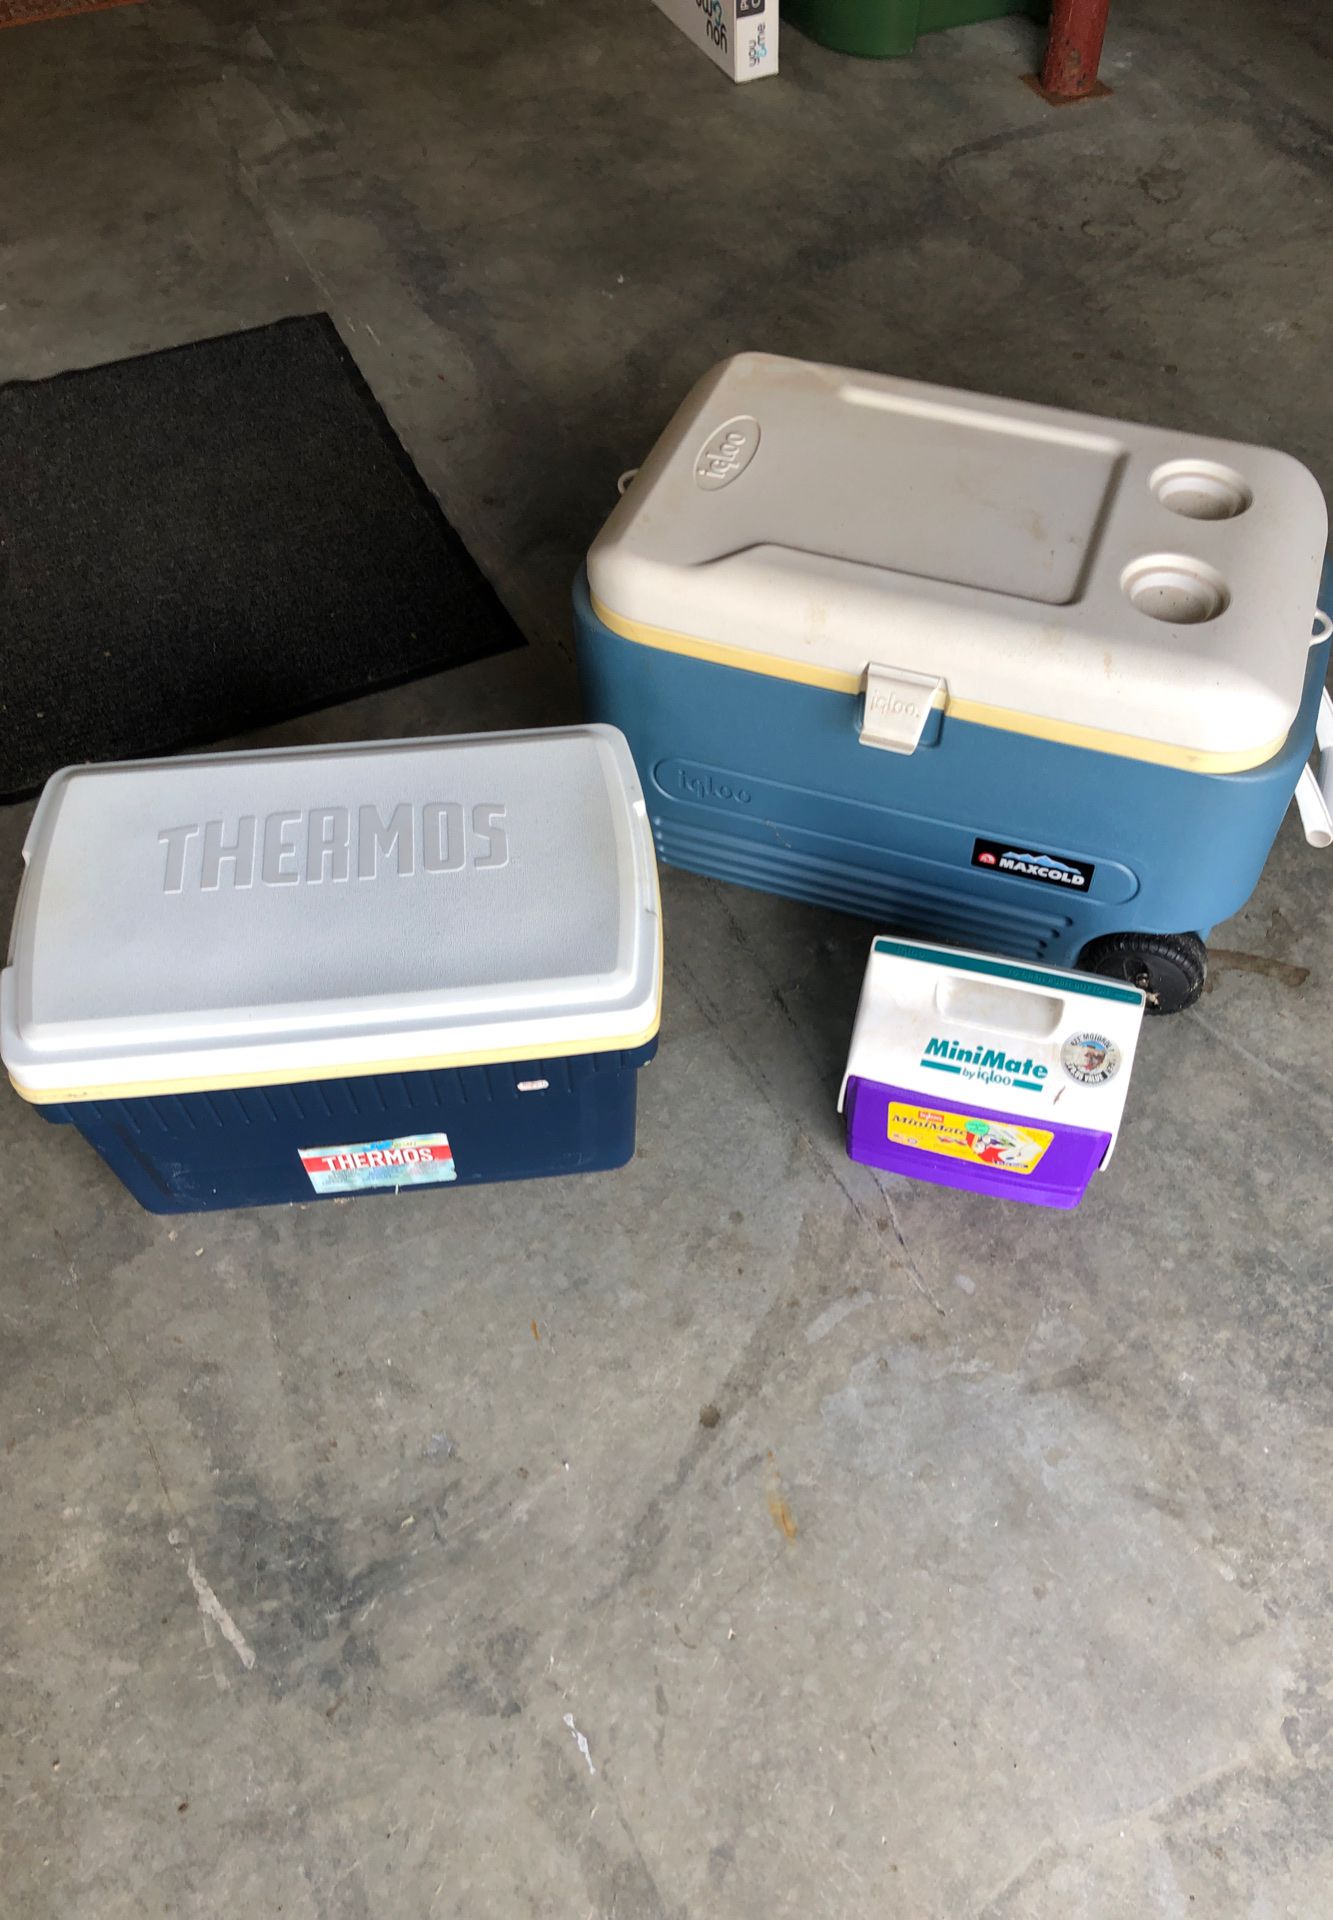 3 coolers. Two Igloo, one Thermos. Will sell individually if need be.